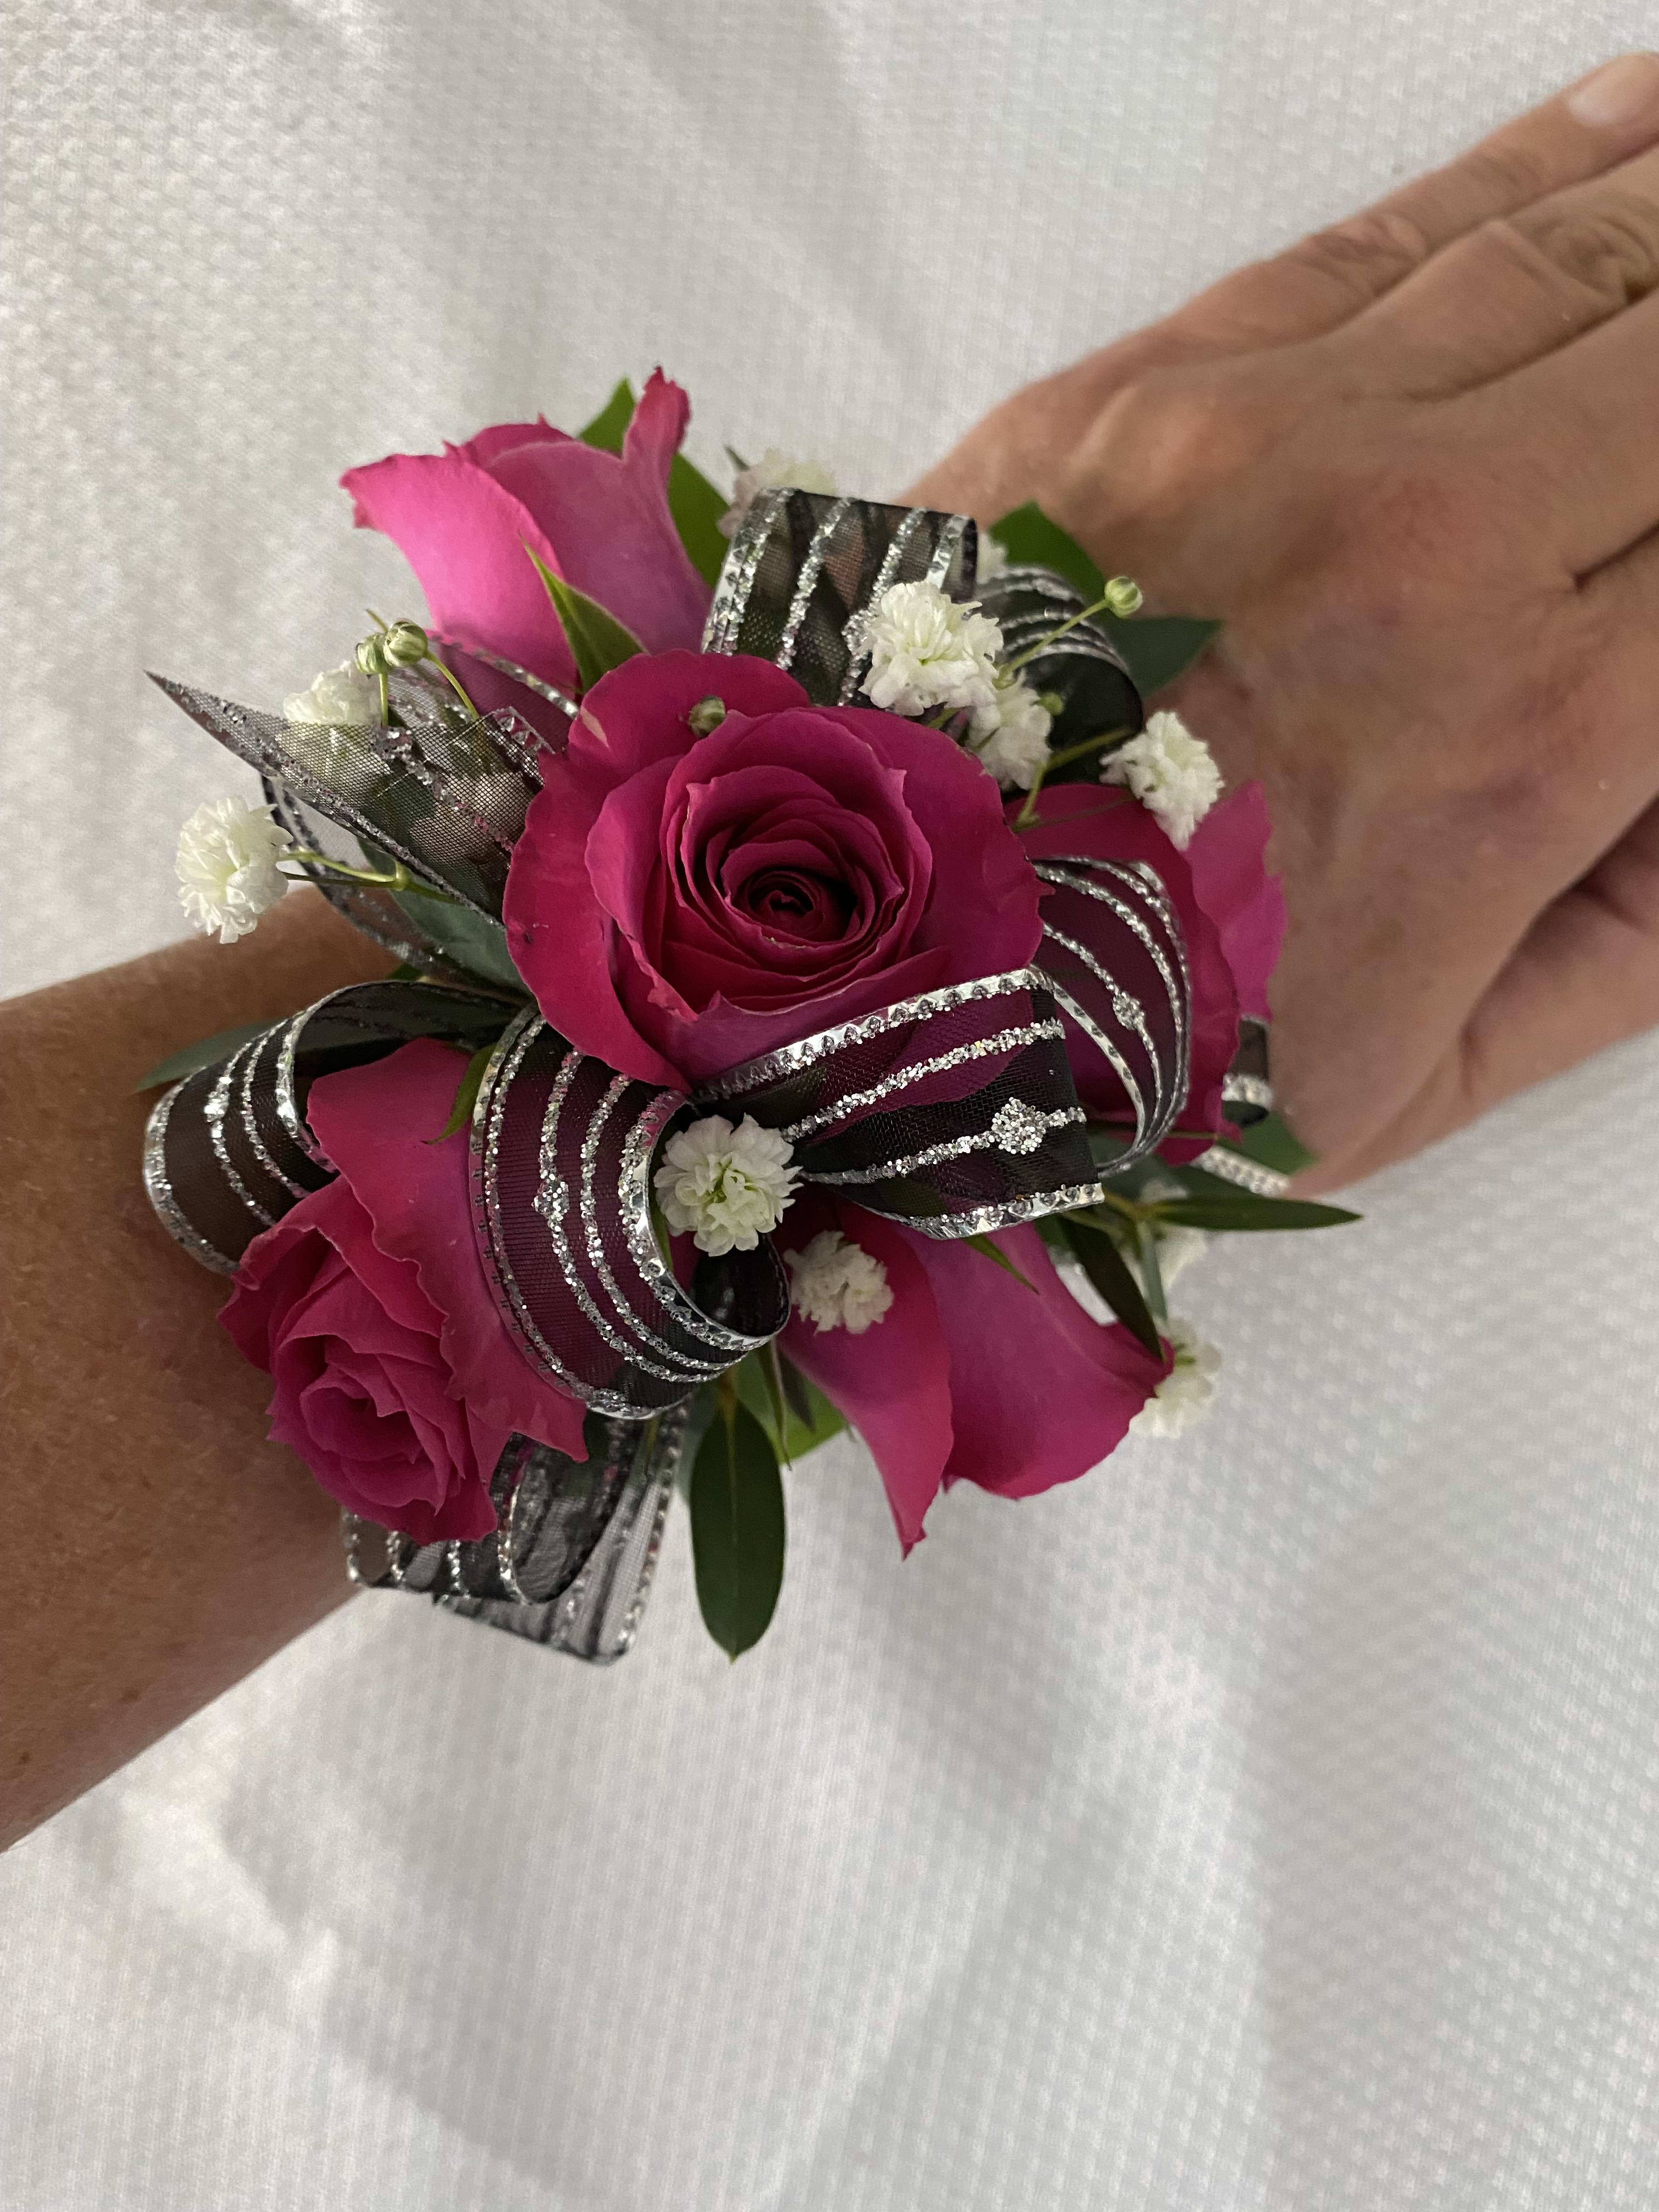 Hot pink wrist corsage in East Rochester, NY